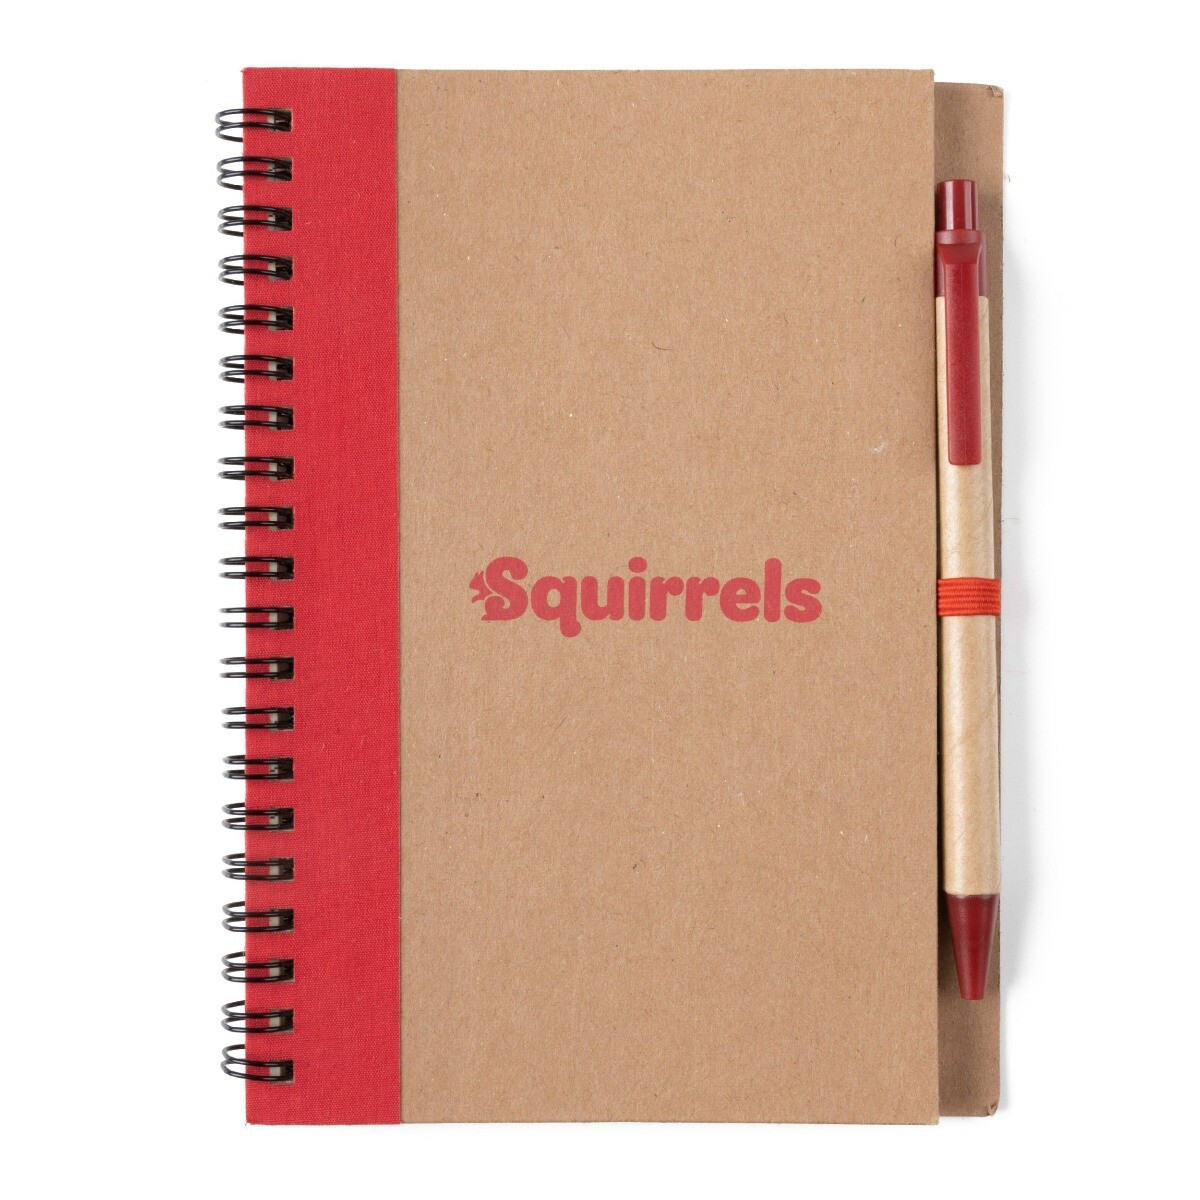 Squirrels Eco Notebook with Pen